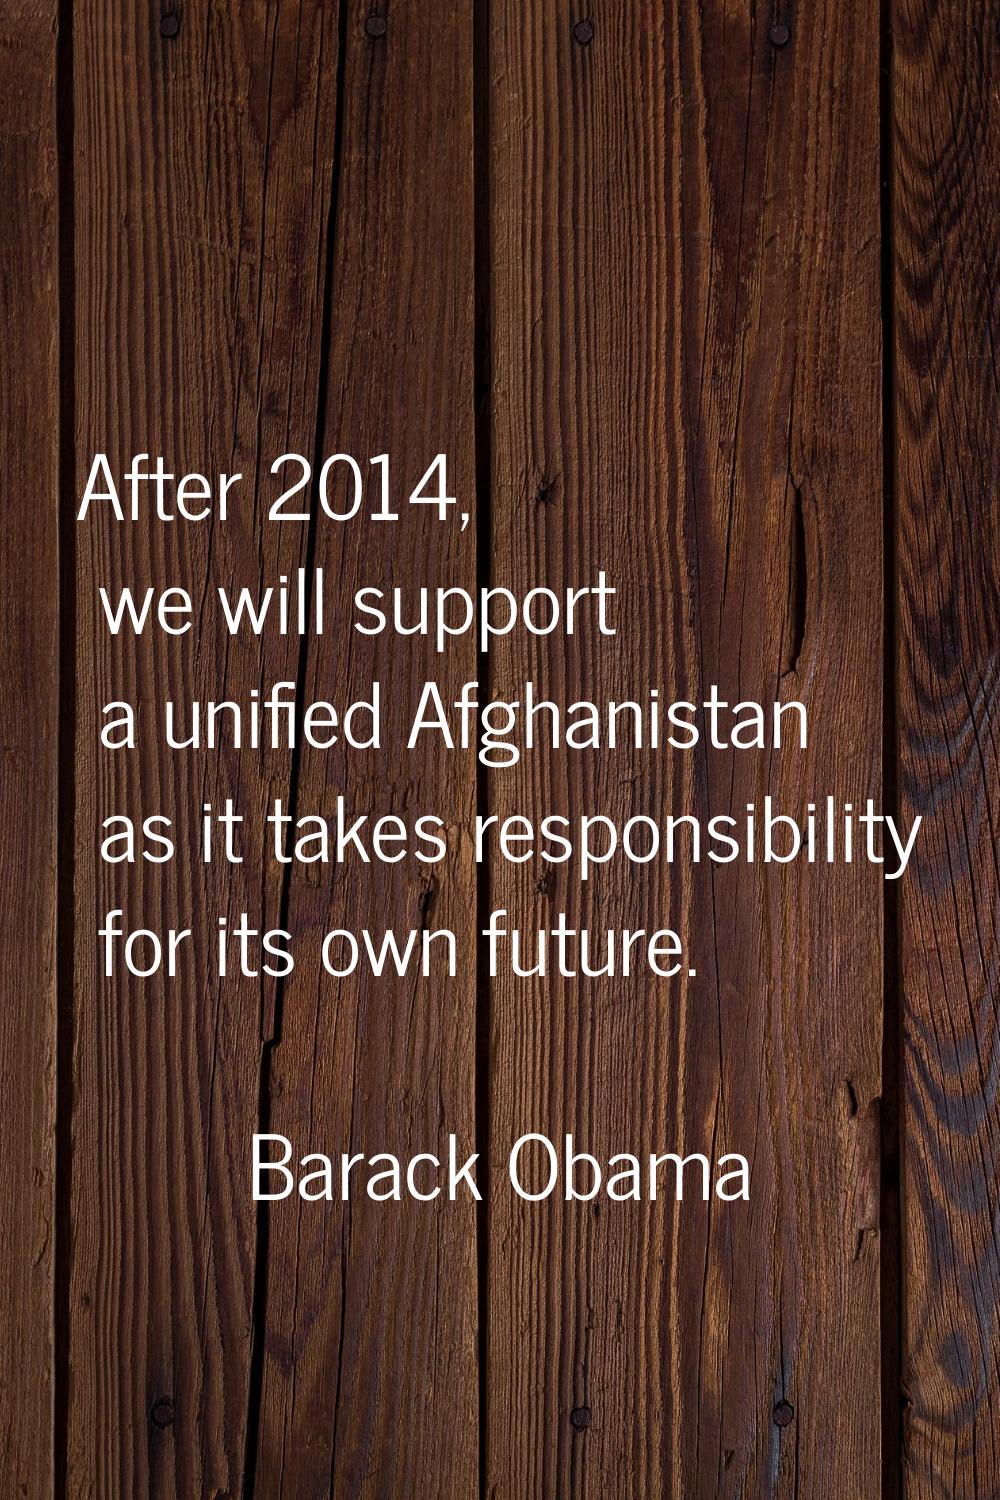 After 2014, we will support a unified Afghanistan as it takes responsibility for its own future.